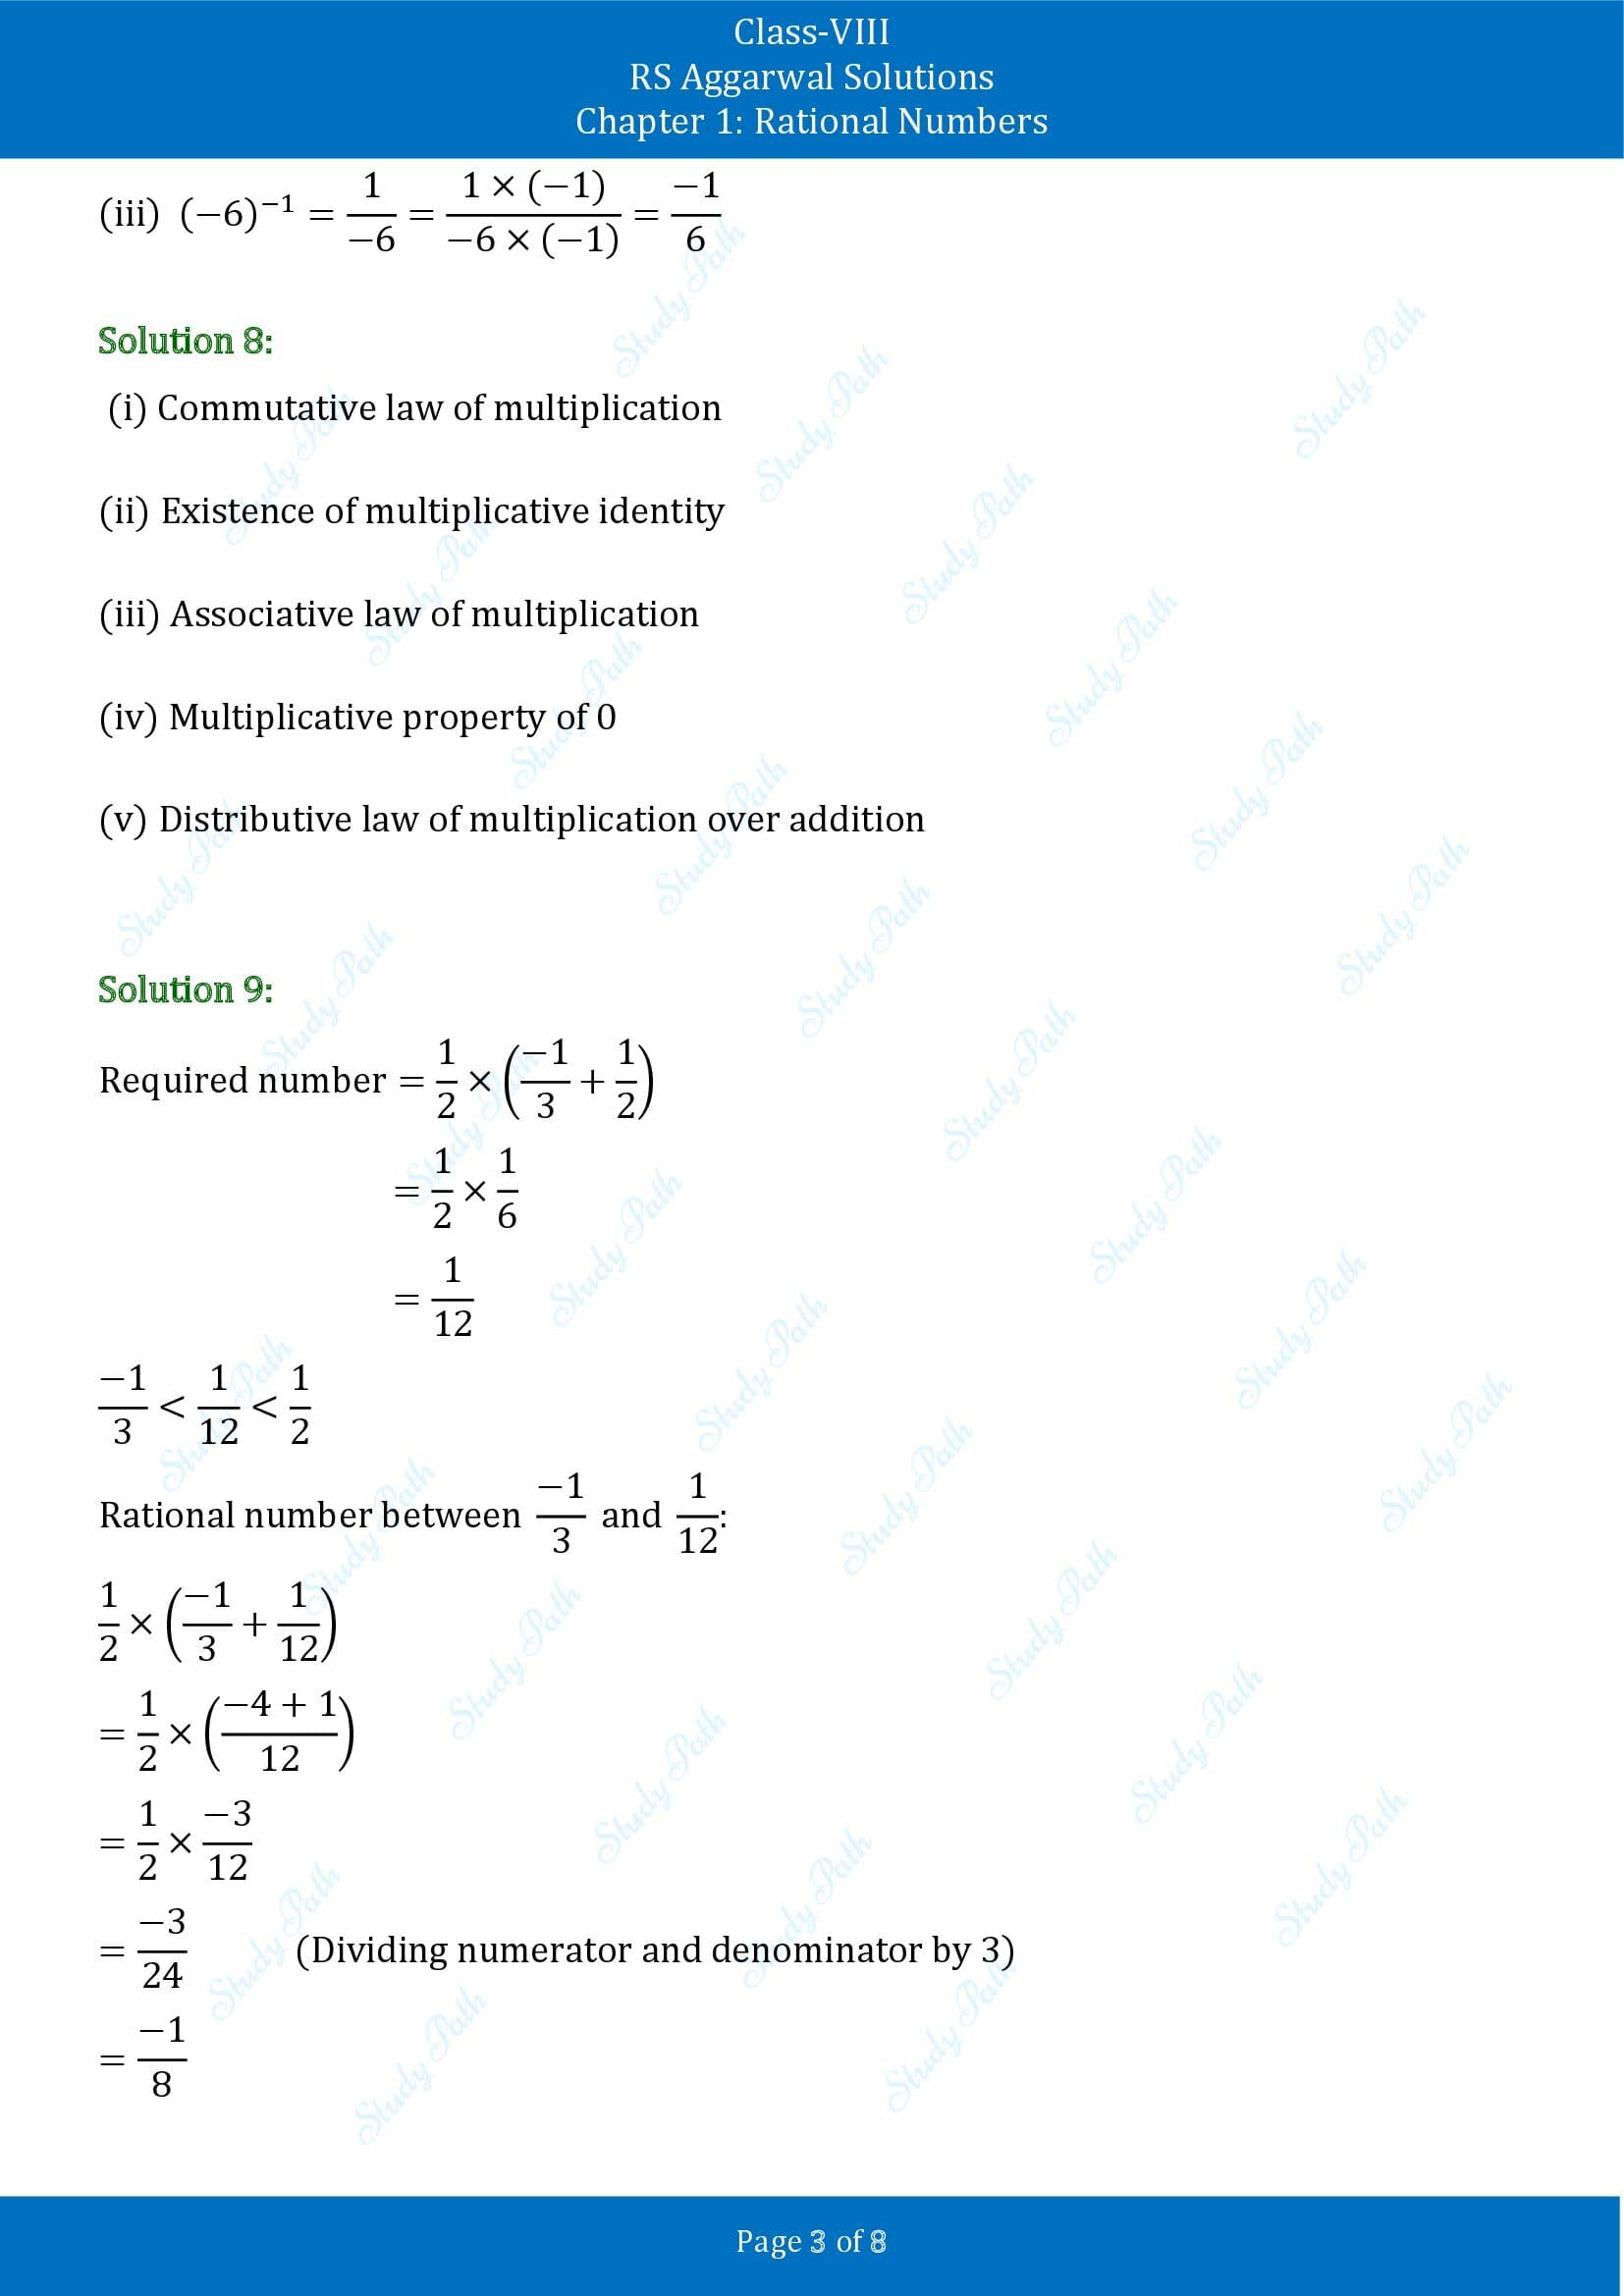 RS Aggarwal Solutions Class 8 Chapter 1 Rational Numbers Test Paper 00003